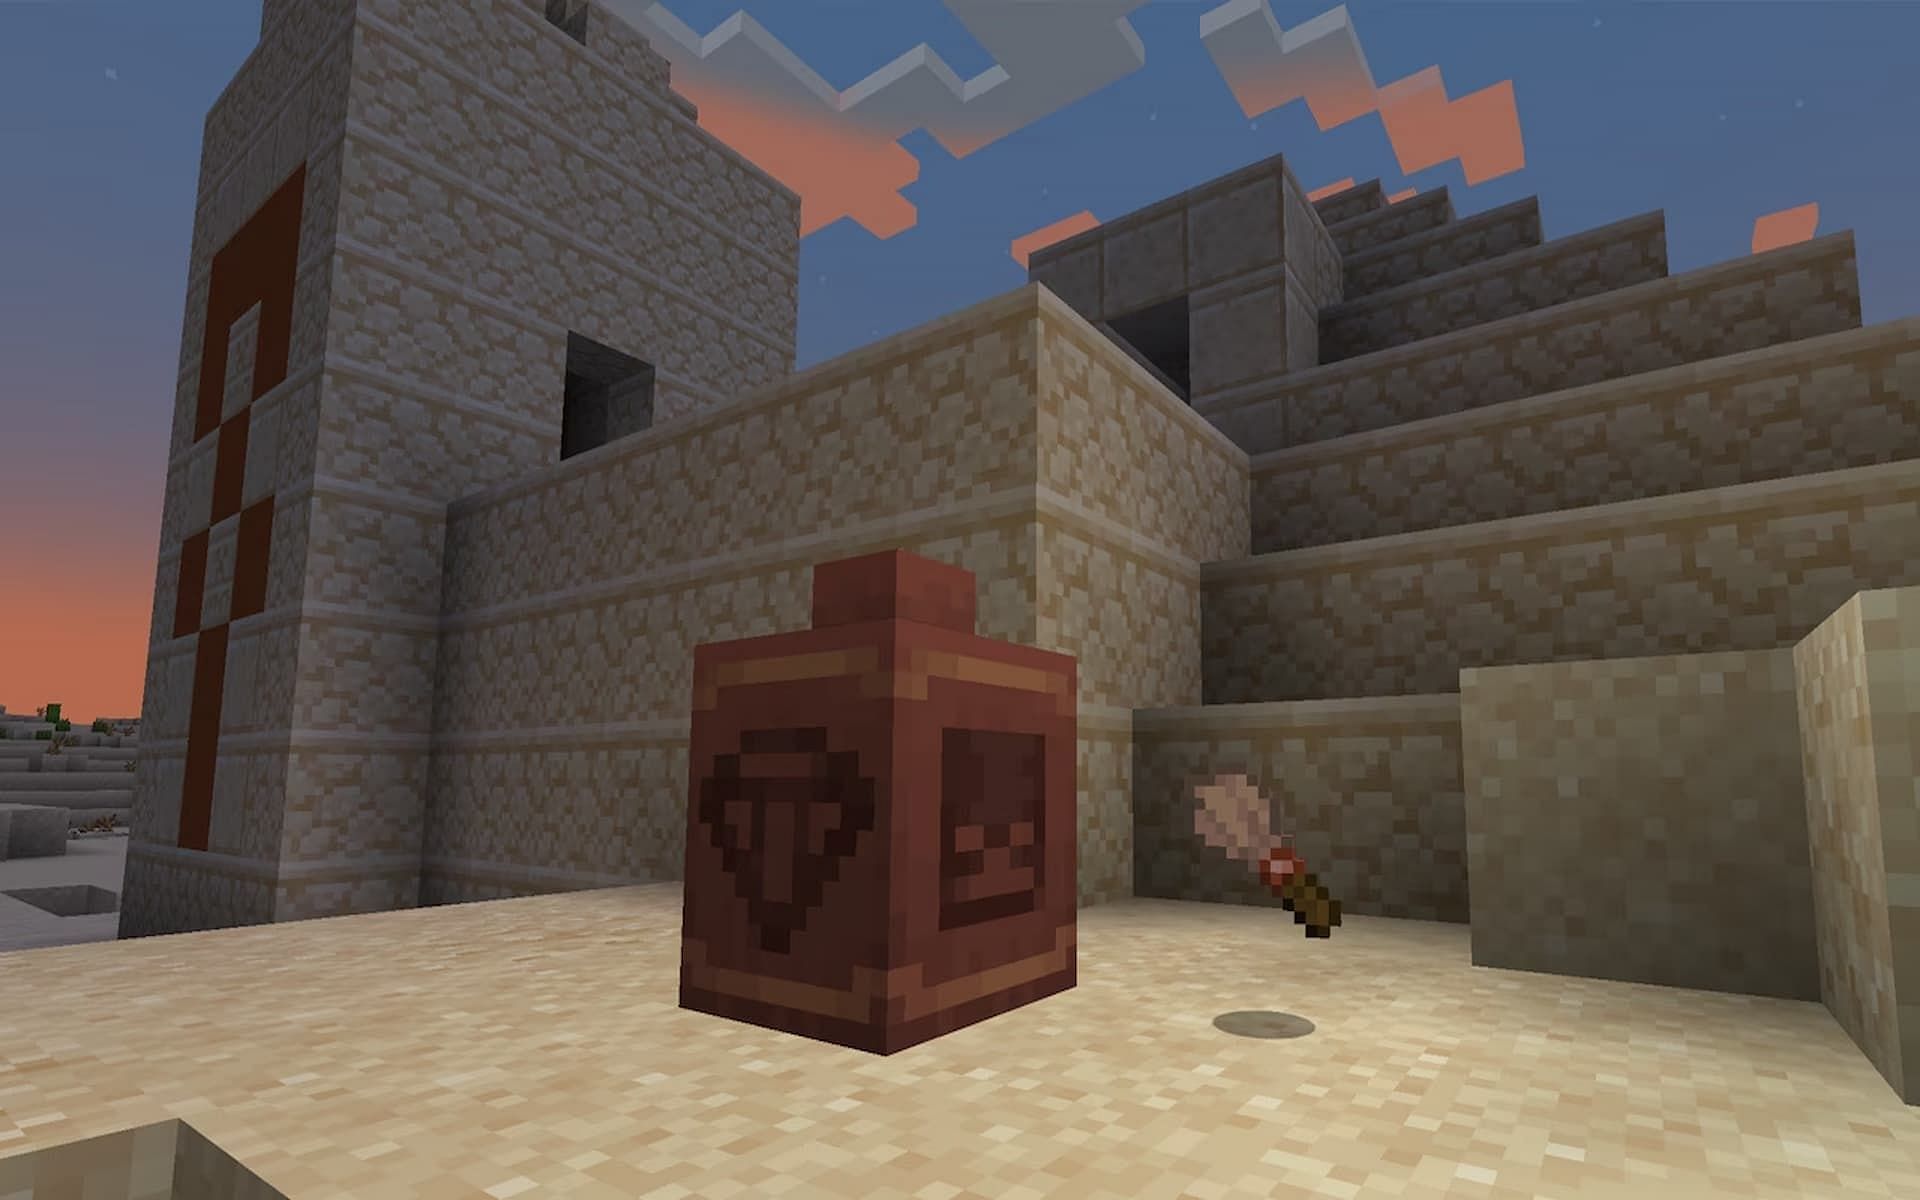 Players must use their new brush tool to uncover the mysteries of the suspicious sand (Image via Mojang)